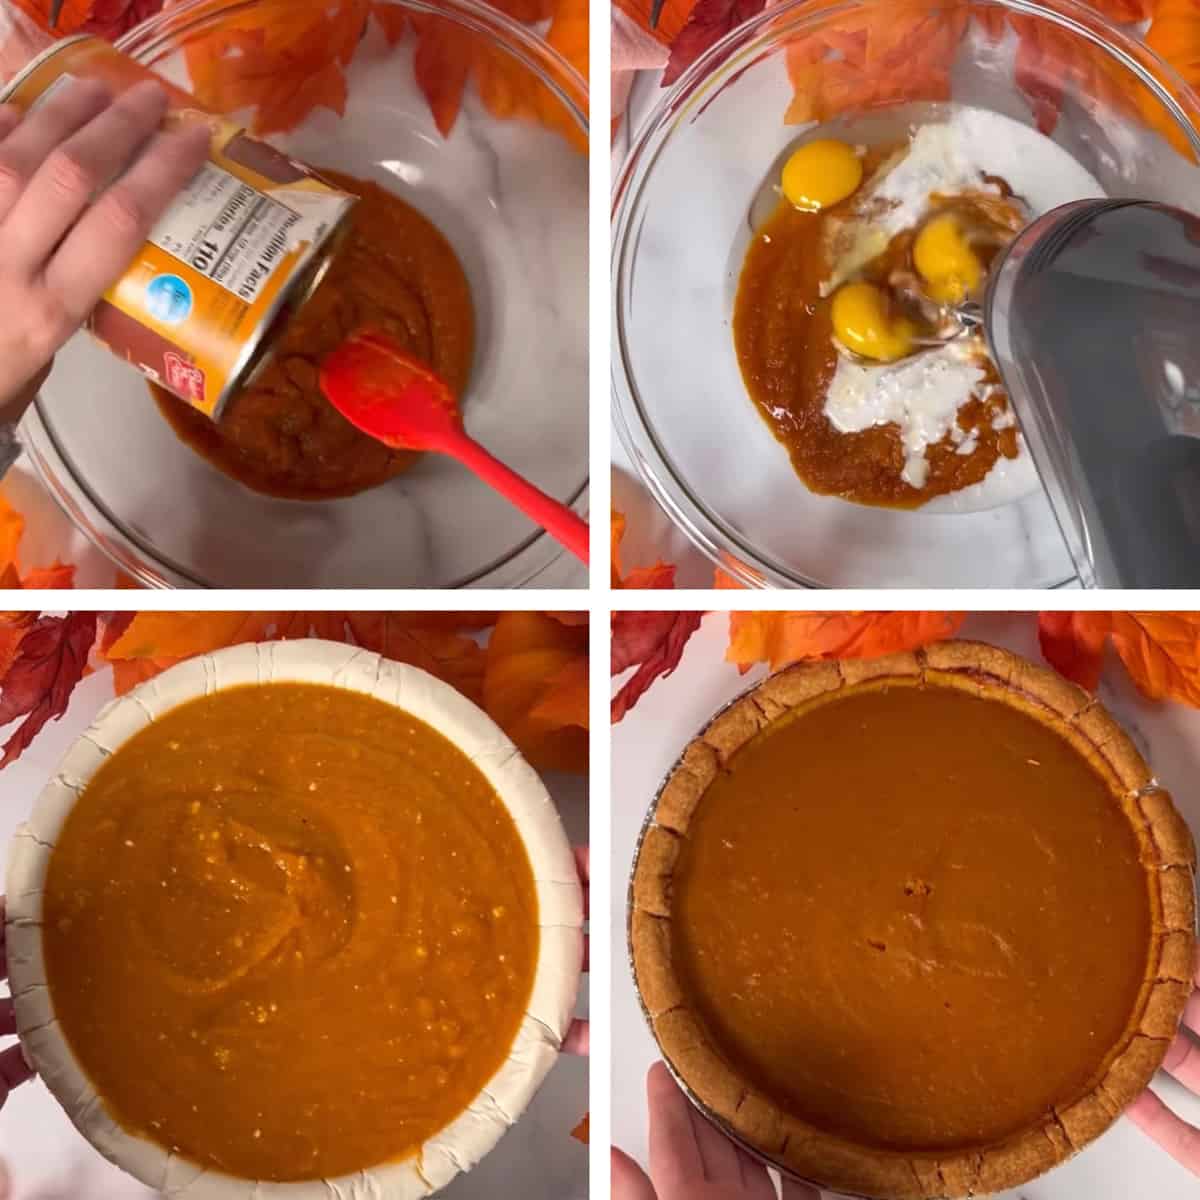 How to make pumpkin pie in four easy steps.